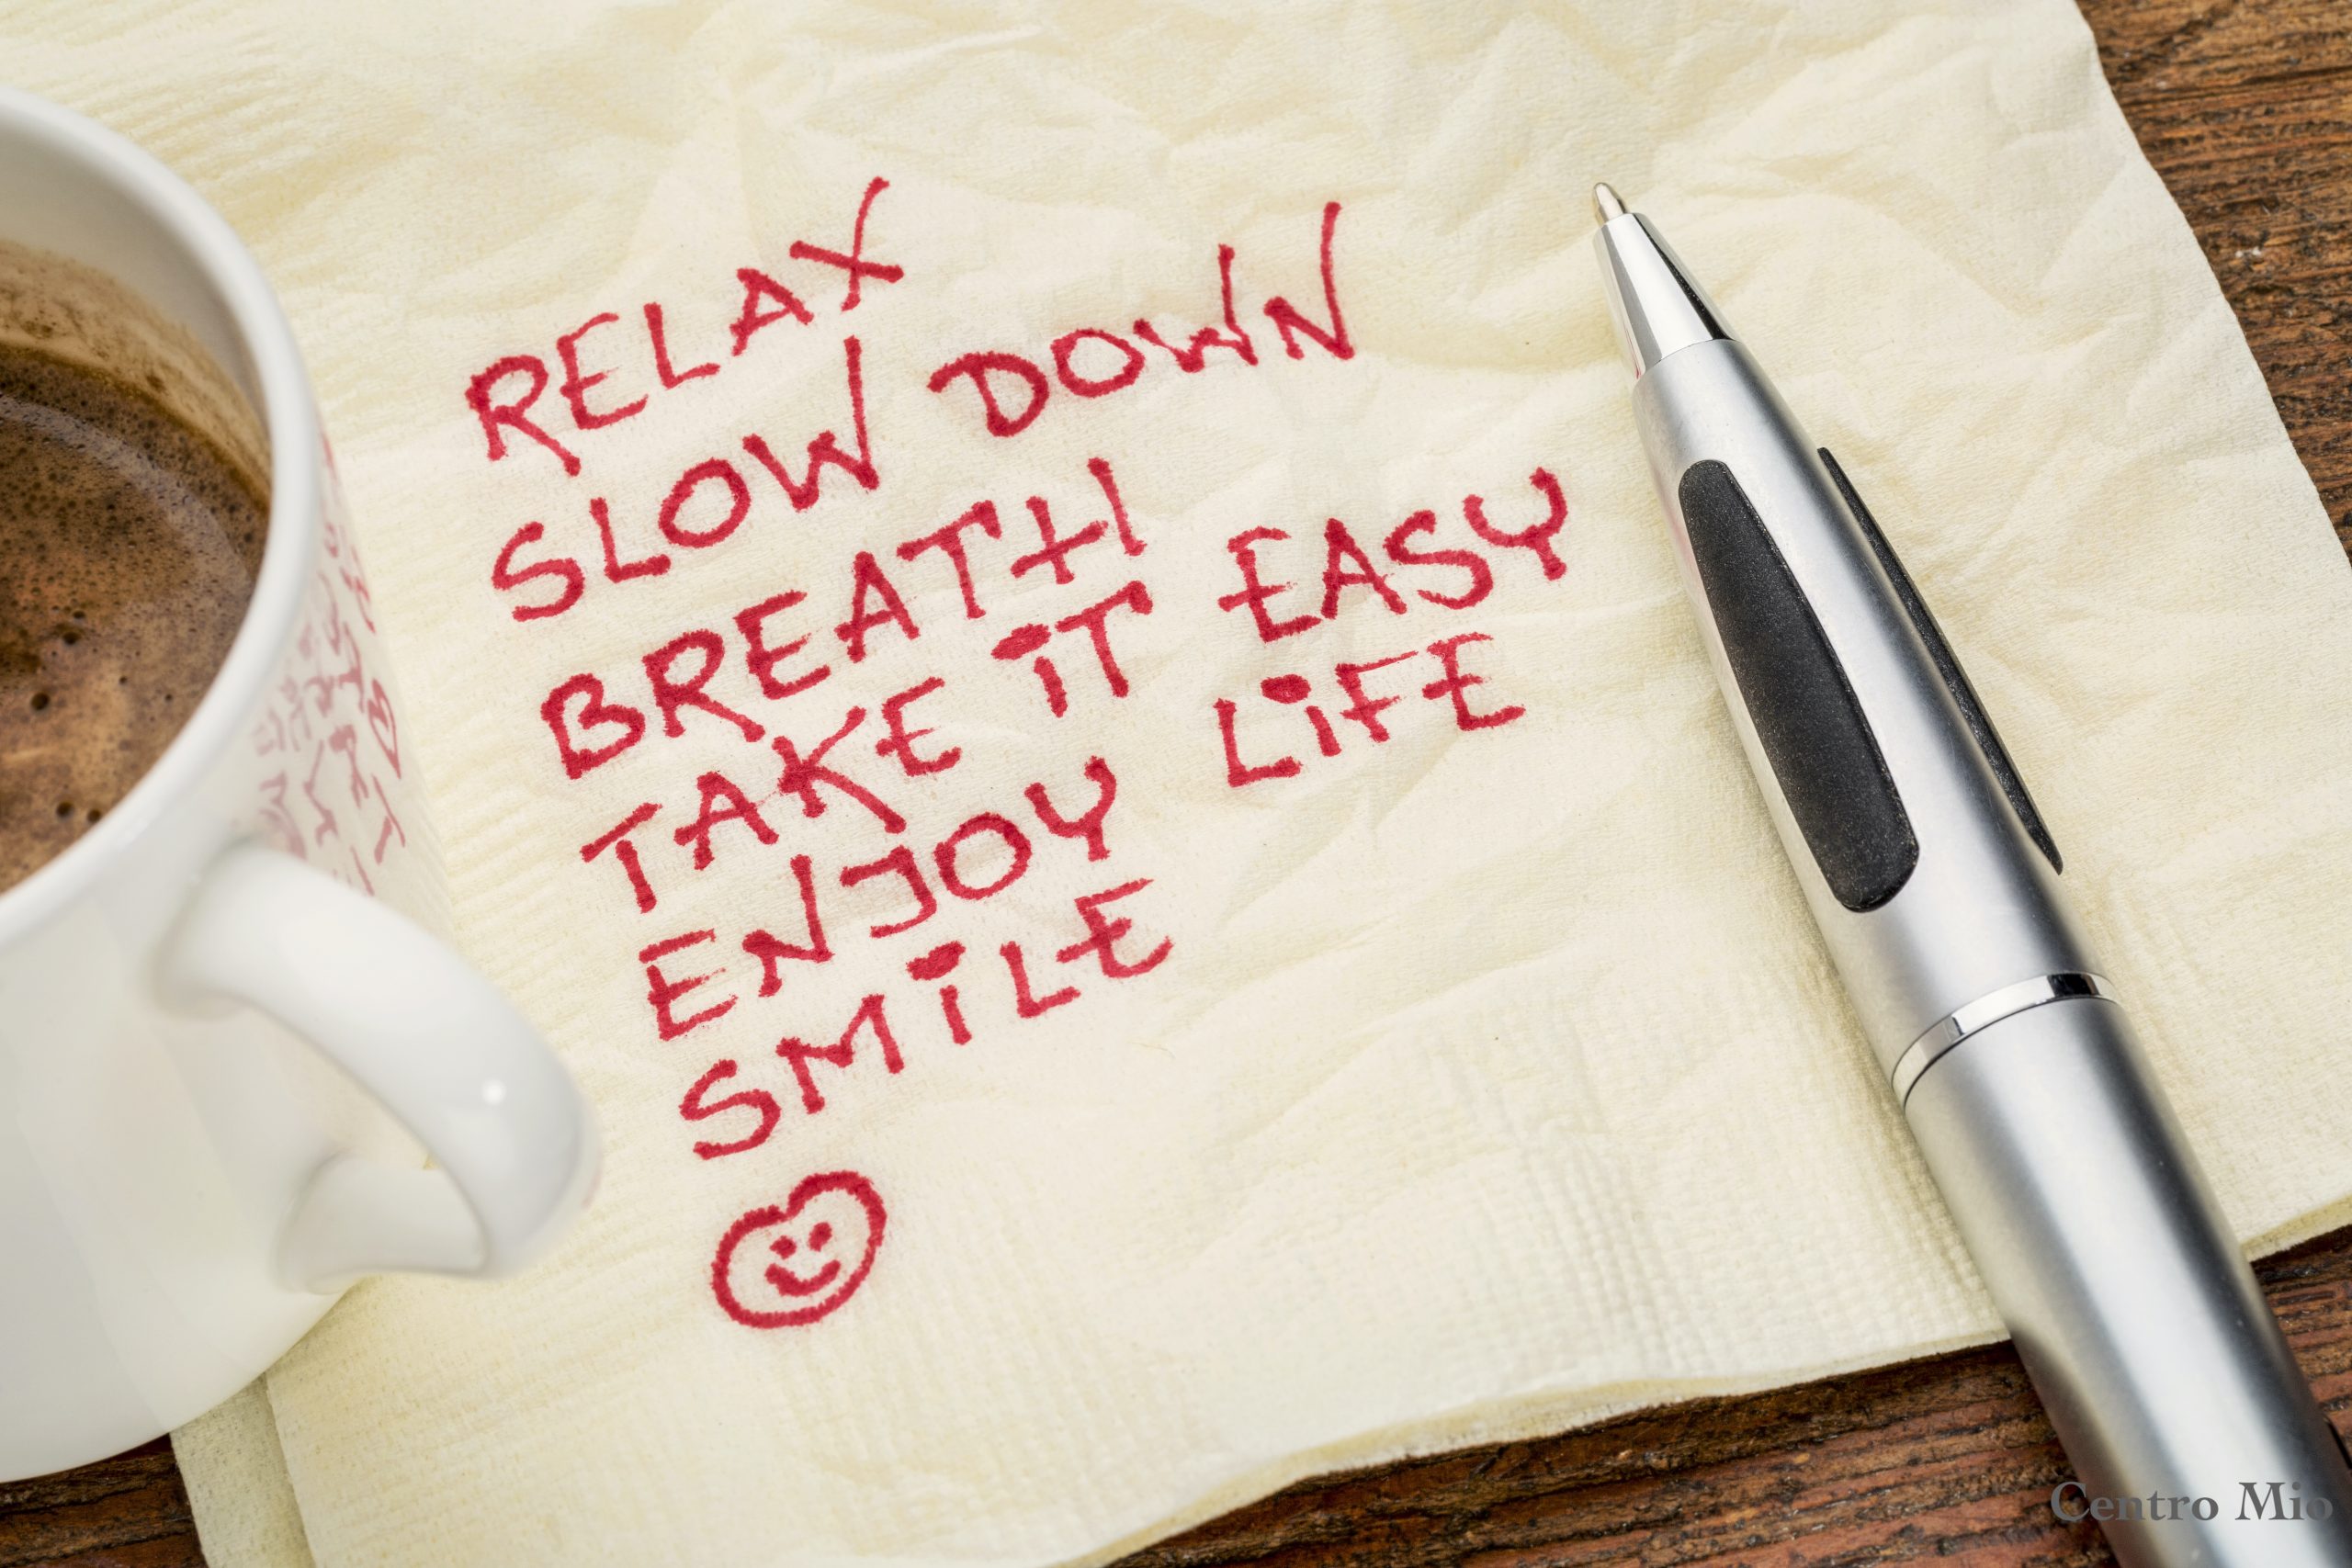 stress reduction concept - relax, slow down, breath, take it easy, enjoy life, smile handwriting on a napkin with a cup of coffee